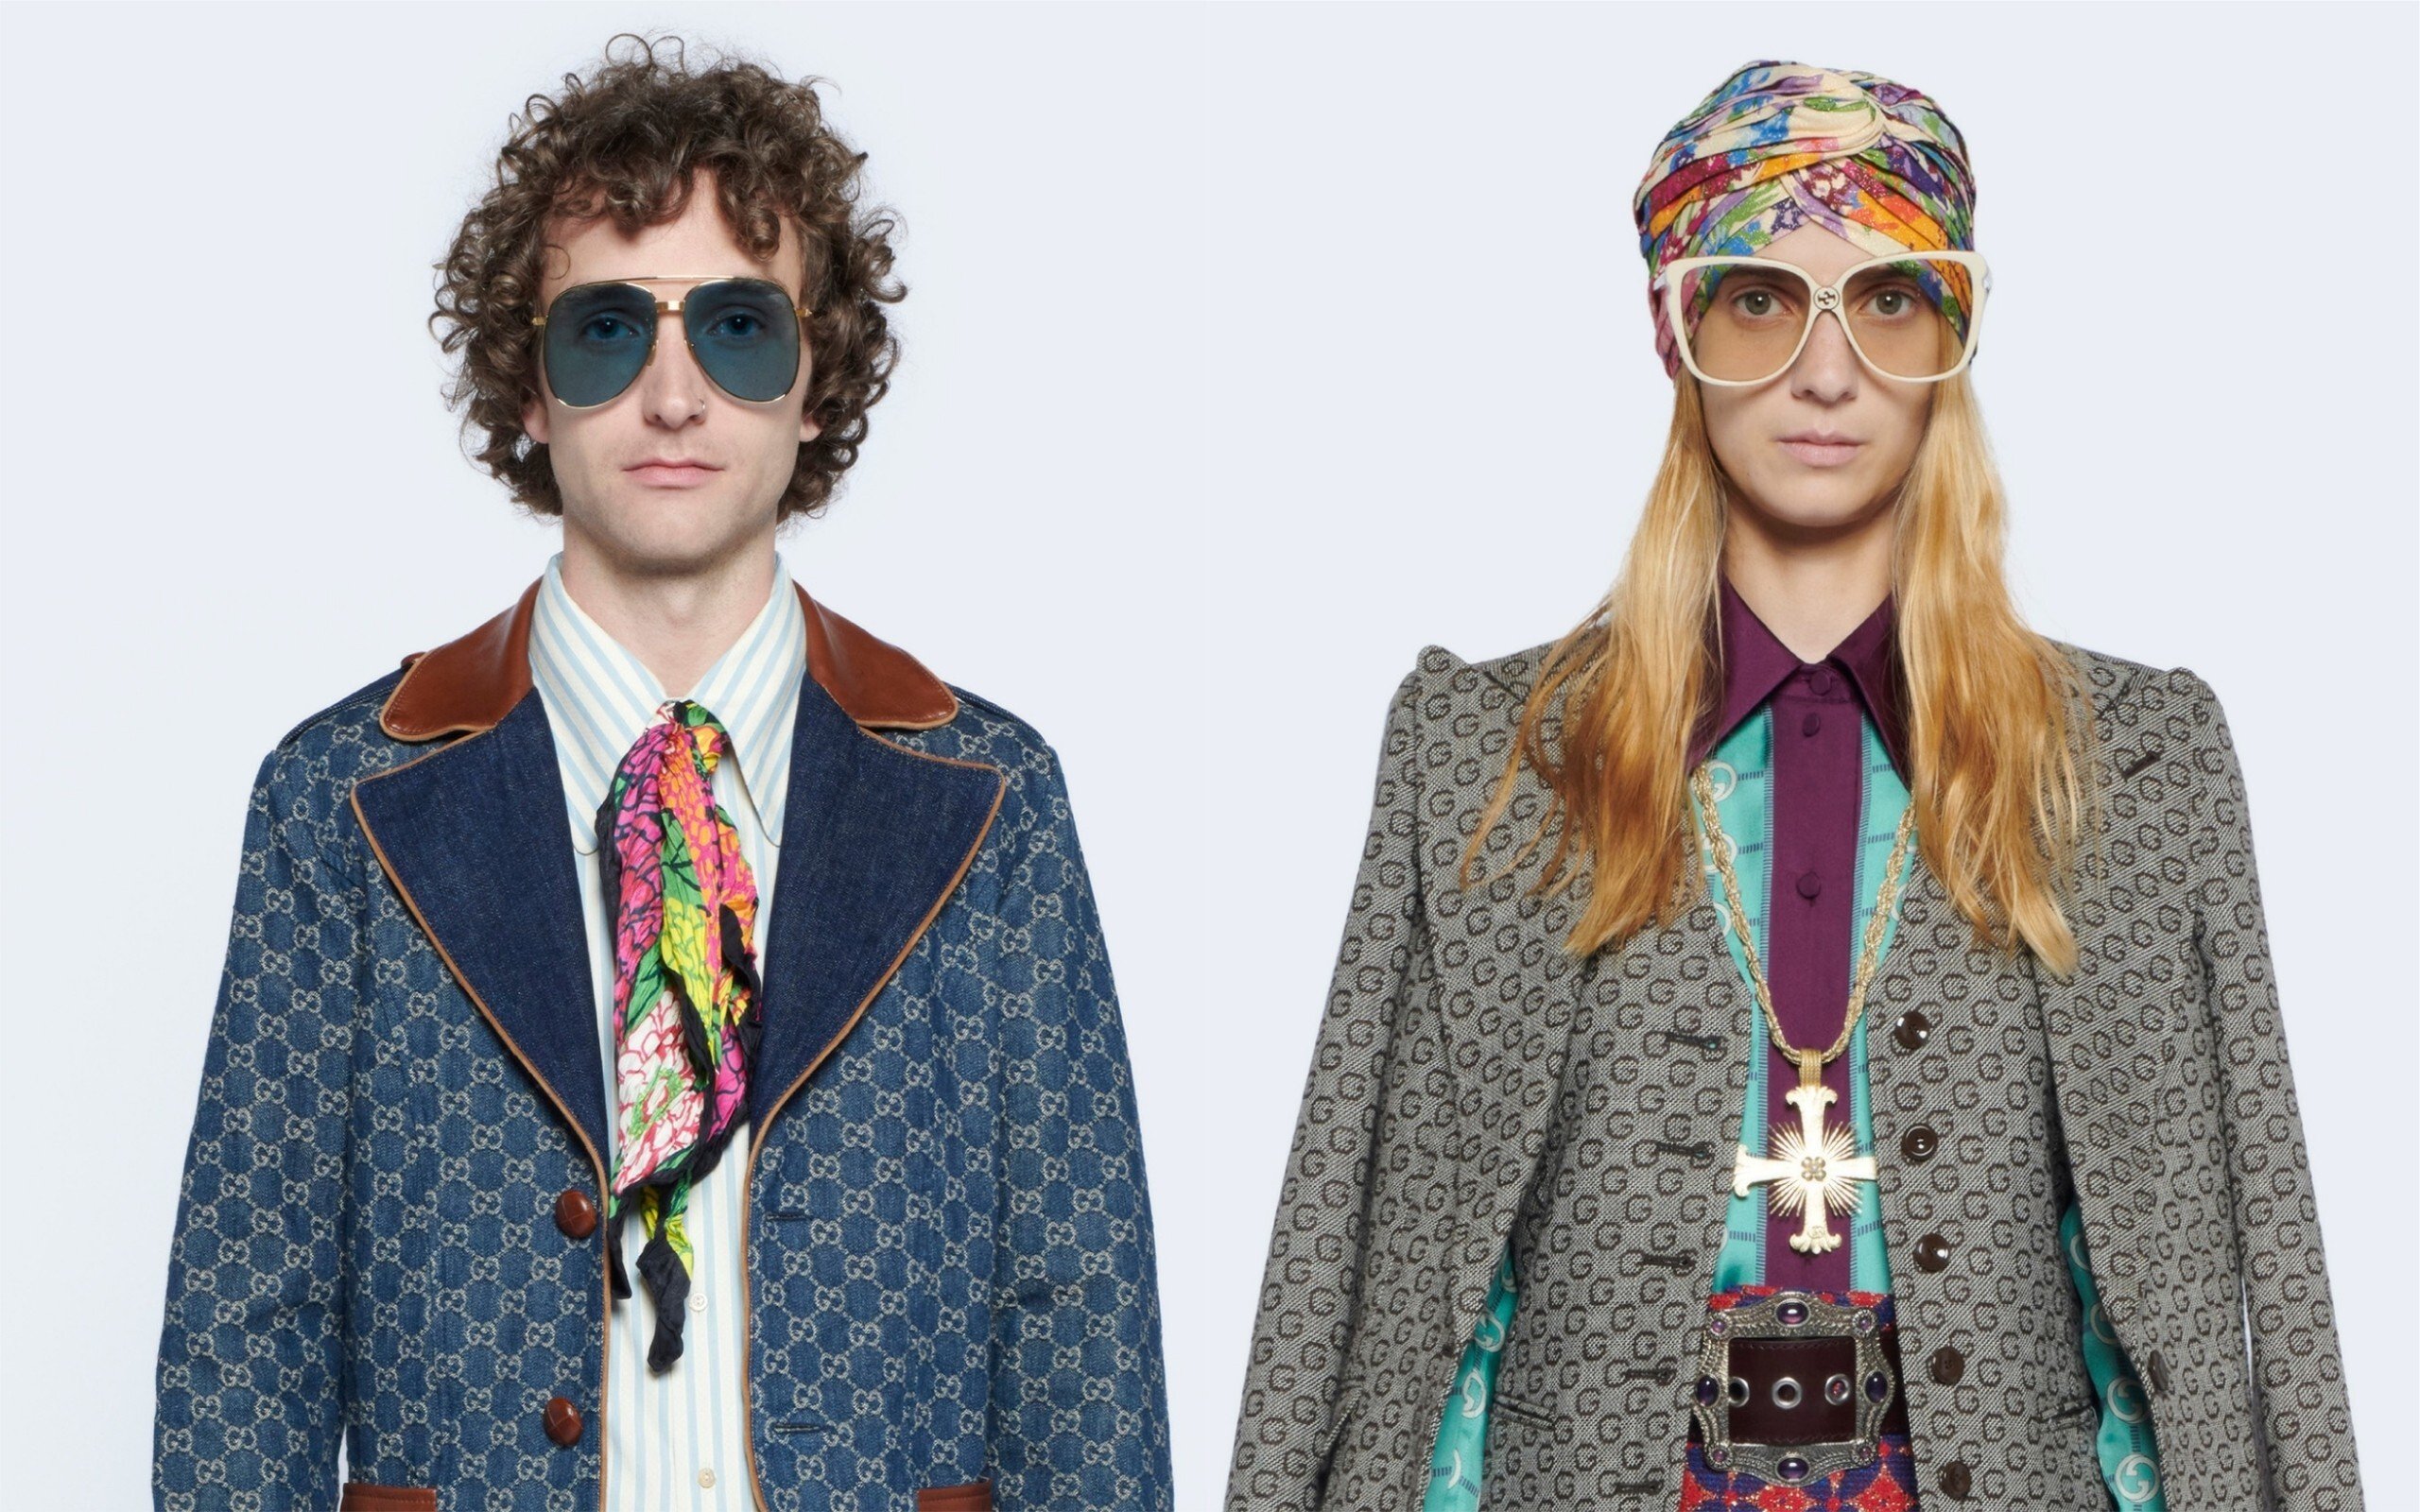  Gucci pokes fun at counterfeiters with “Fake/Not”  collection